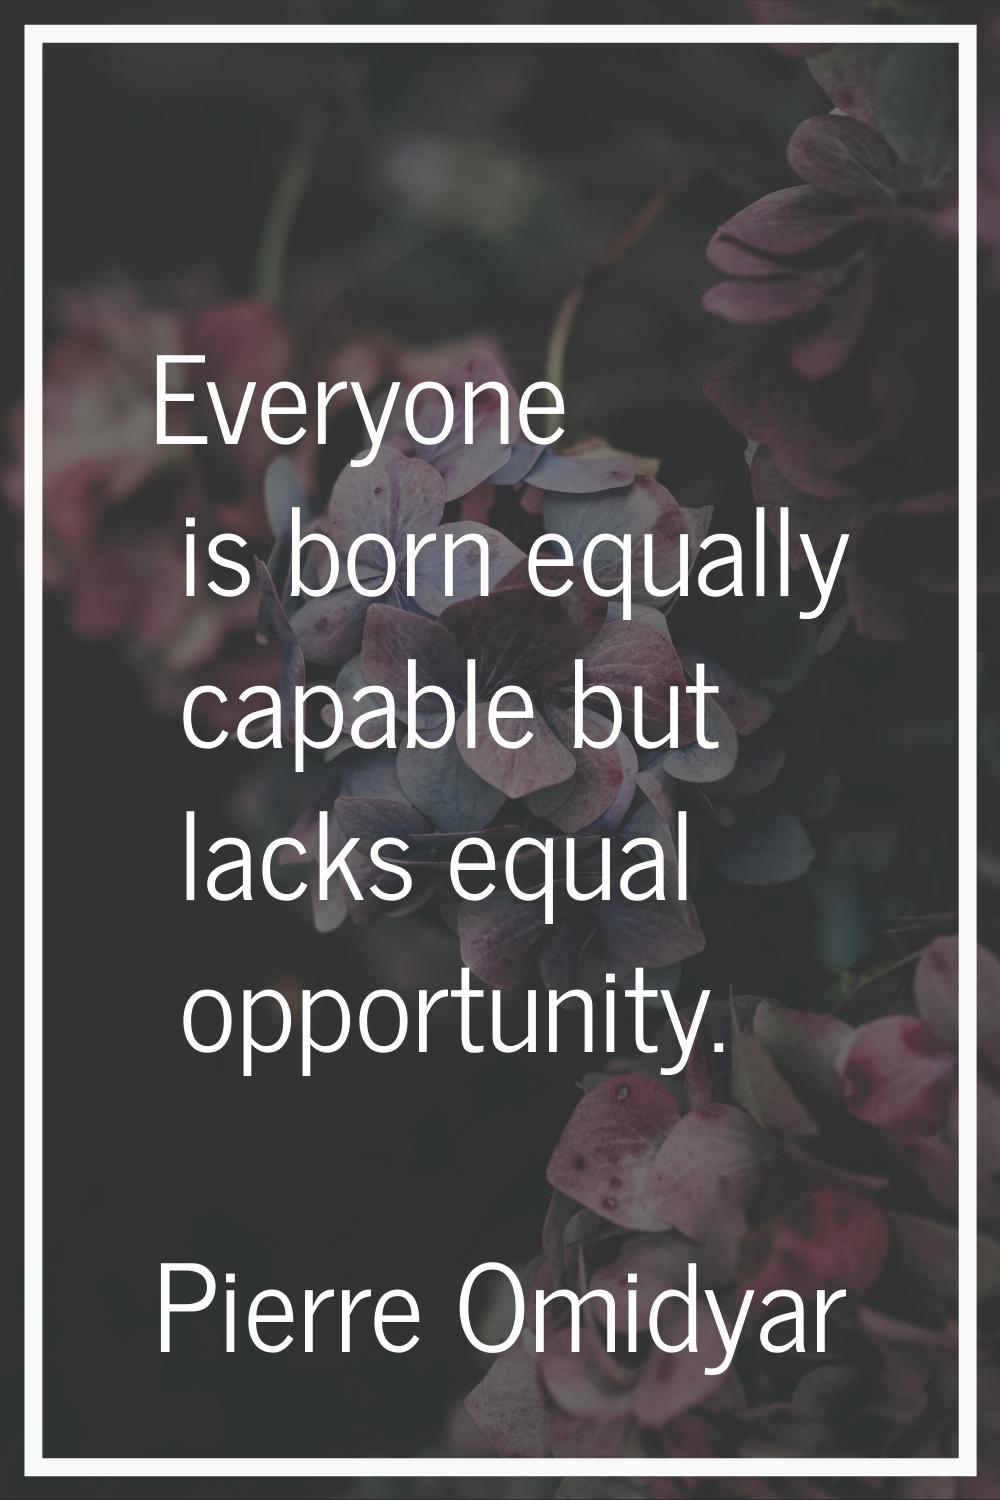 Everyone is born equally capable but lacks equal opportunity.